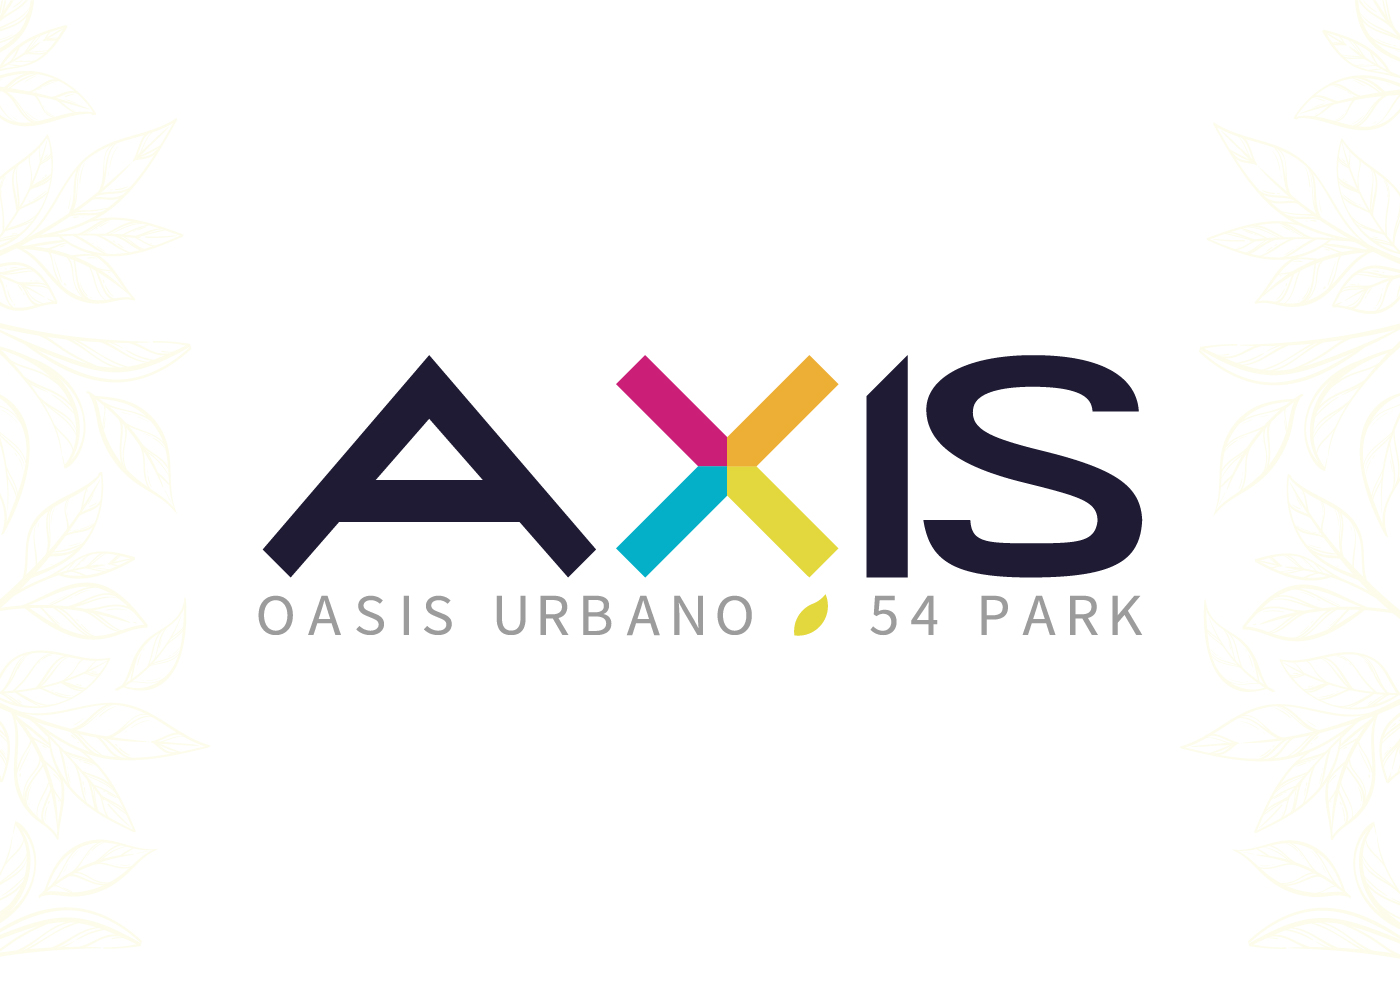 proyecto axis oasis urbano 54 park